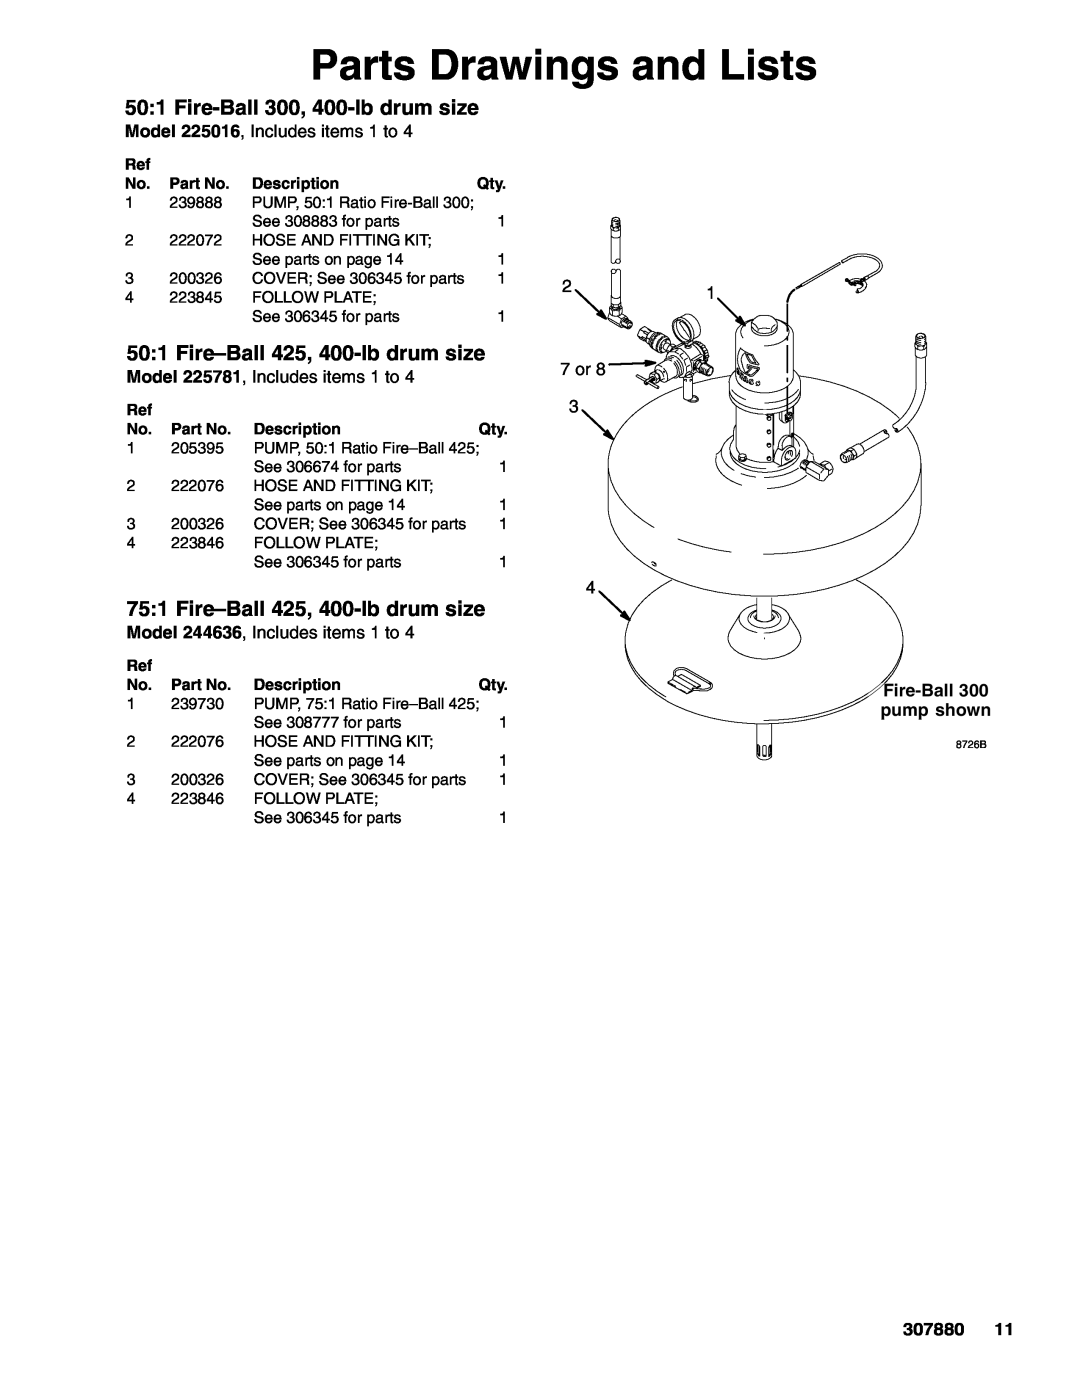 Graco 425 50 1 Fire-Ball300, 400-lbdrum size, Parts Drawings and Lists, 307880, Description 